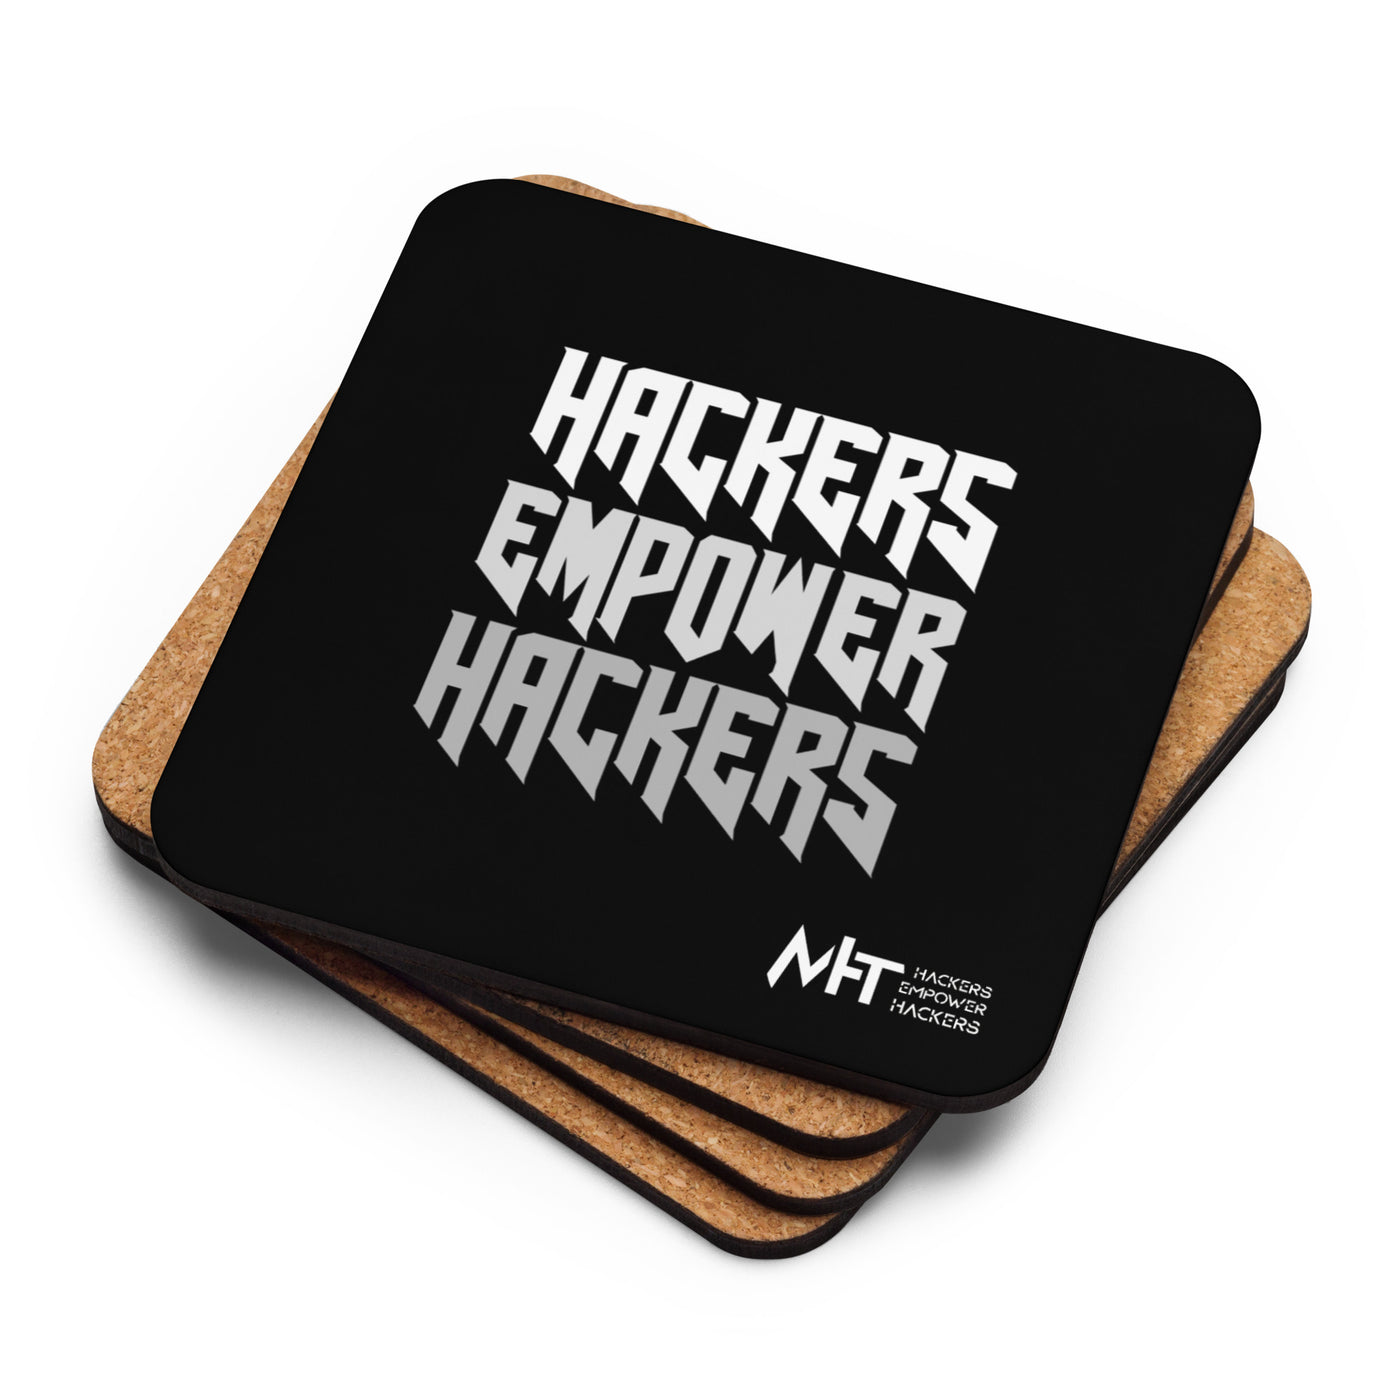 Hackers Empower Hackers V4 - Cork-back coaster